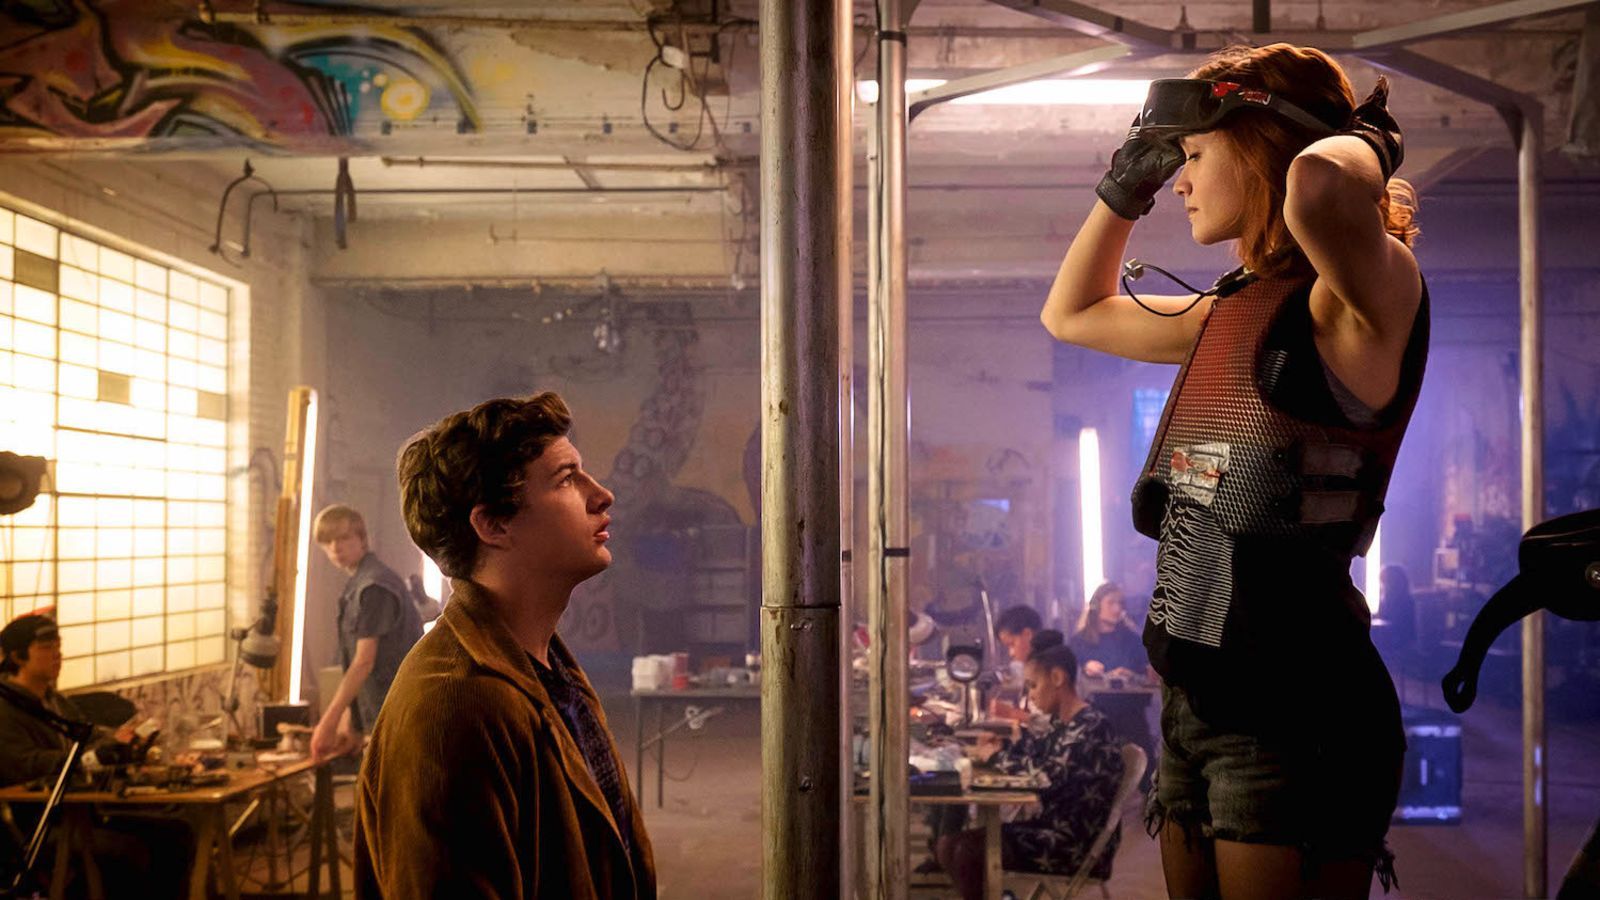 REVIEW: 'Ready Player One' beats the game by scrubbing away the grime